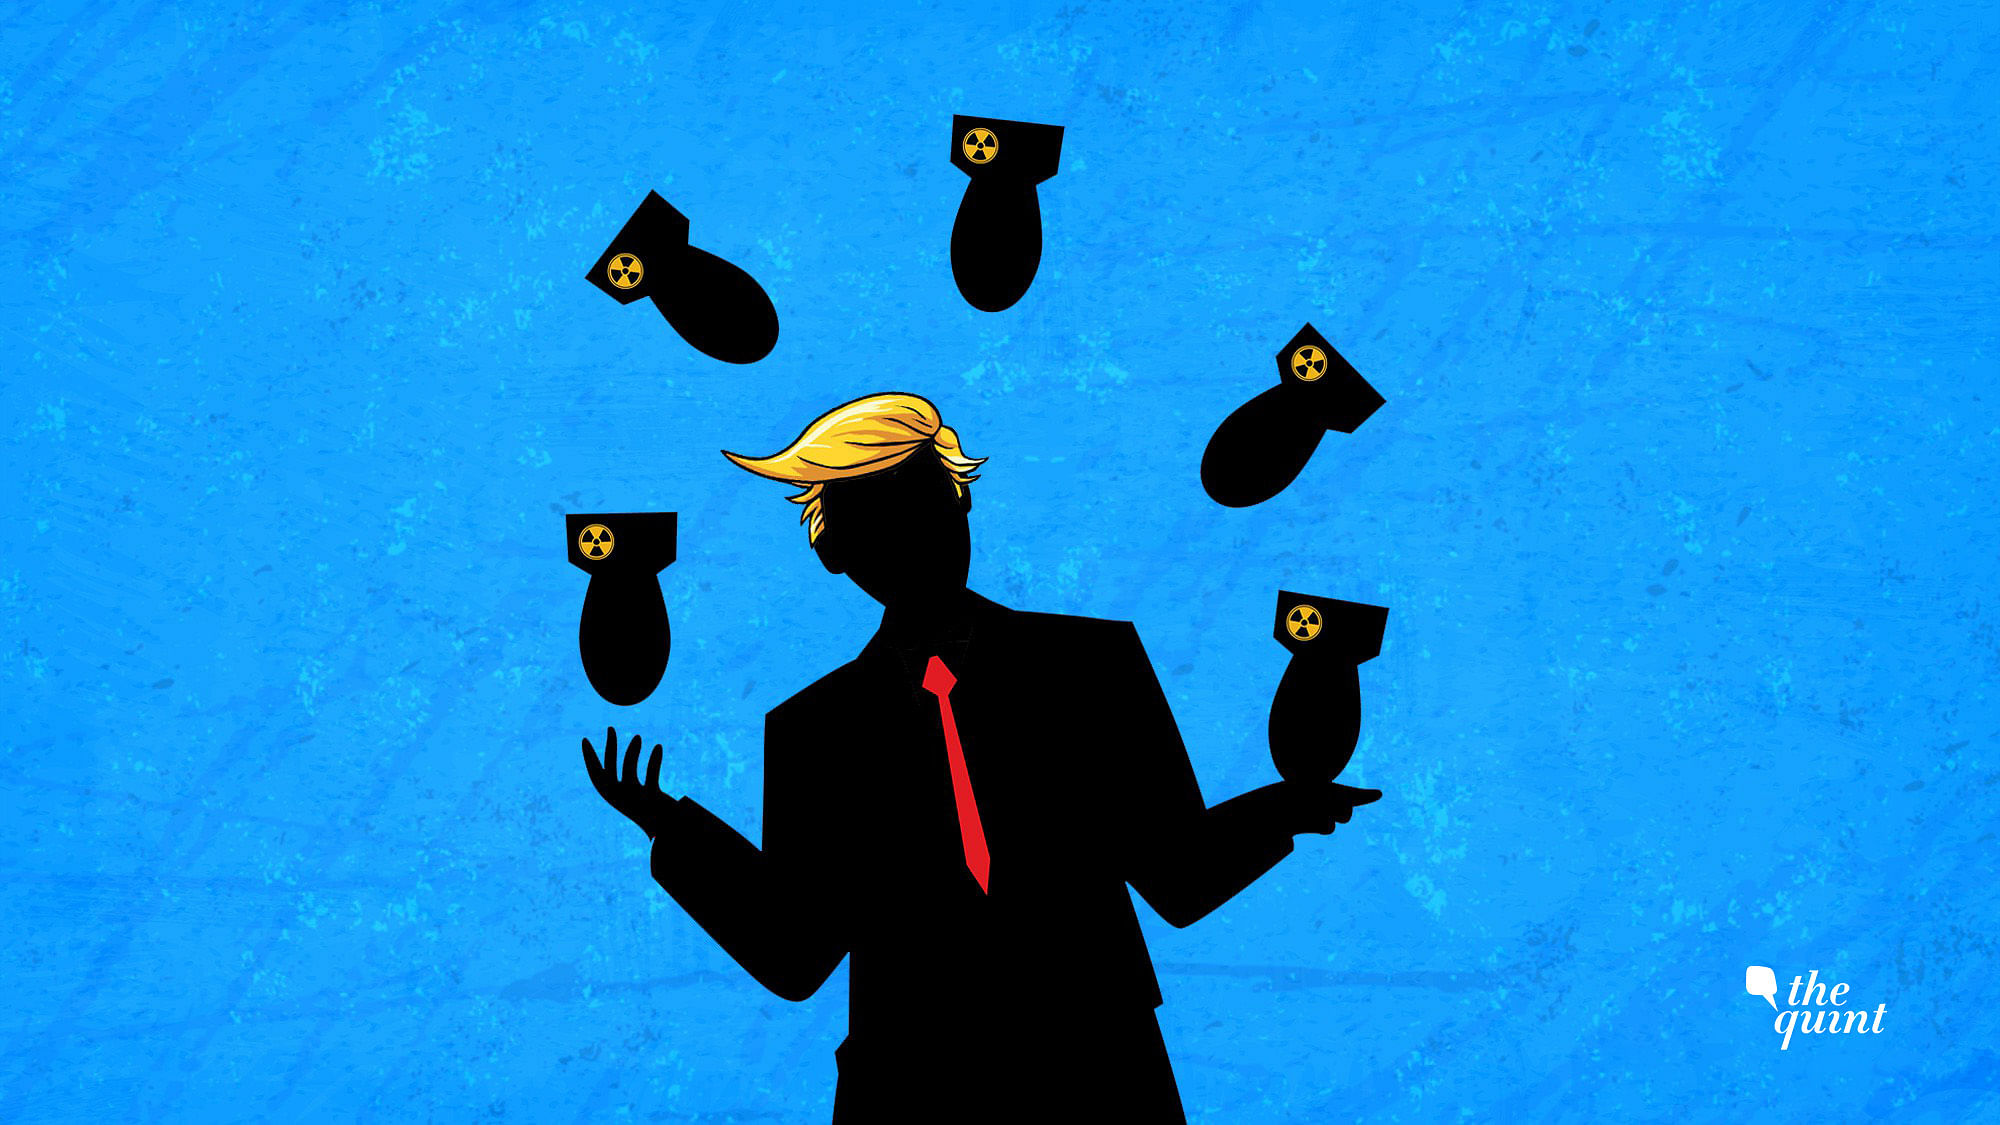 Illustration of Donald Trump and nuclear weapons used for representational purposes.